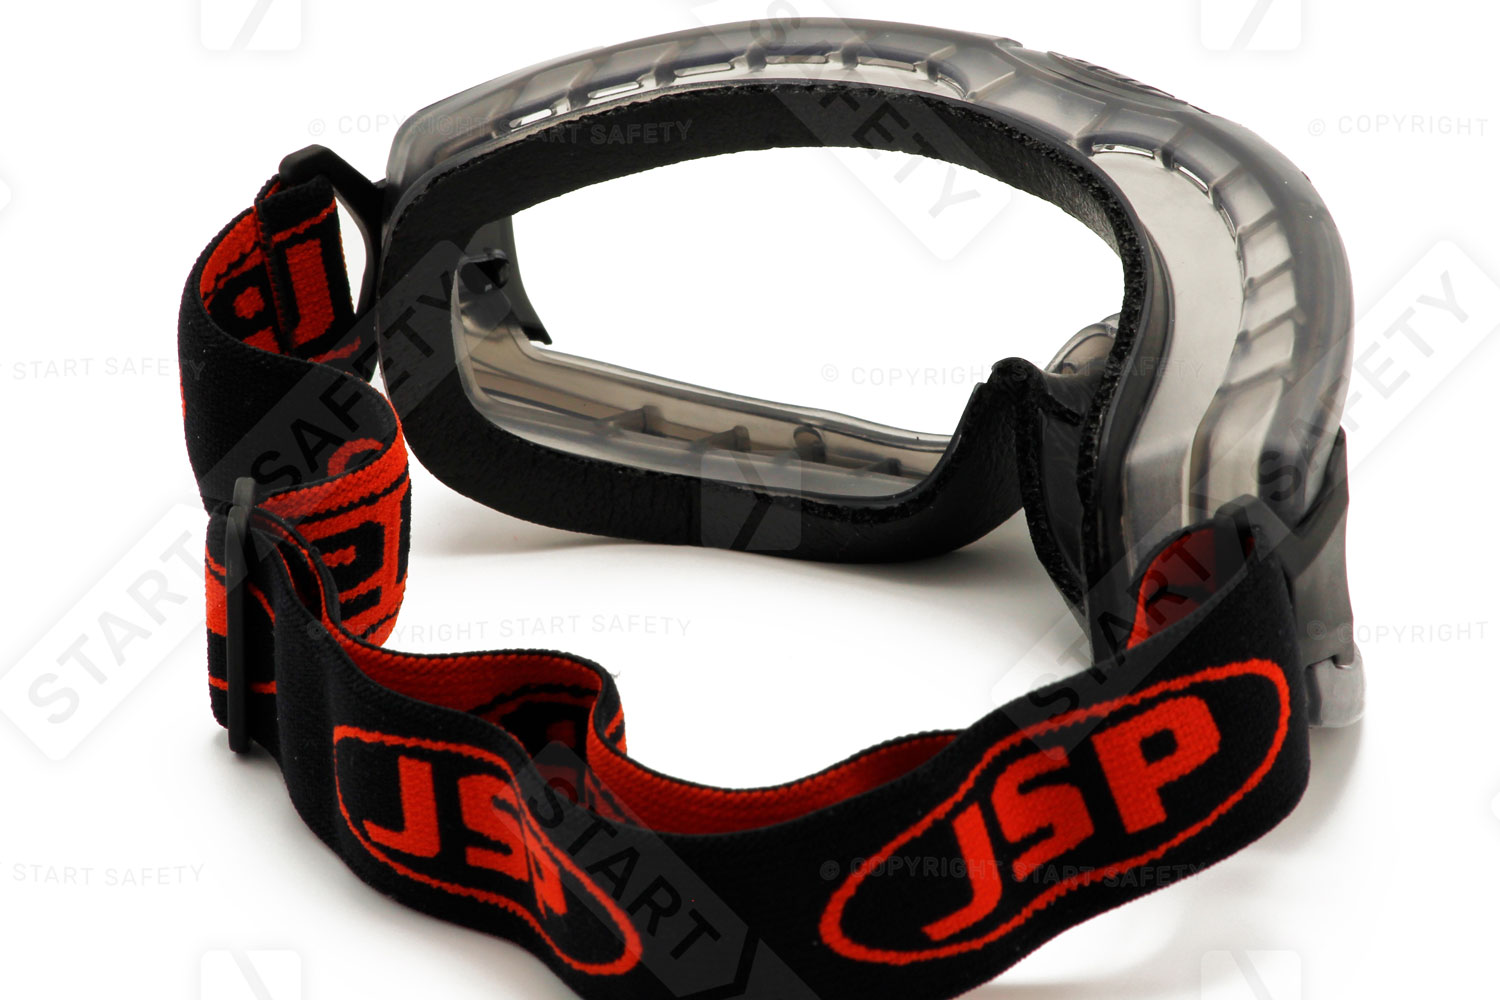 Single Lens Safety Goggle